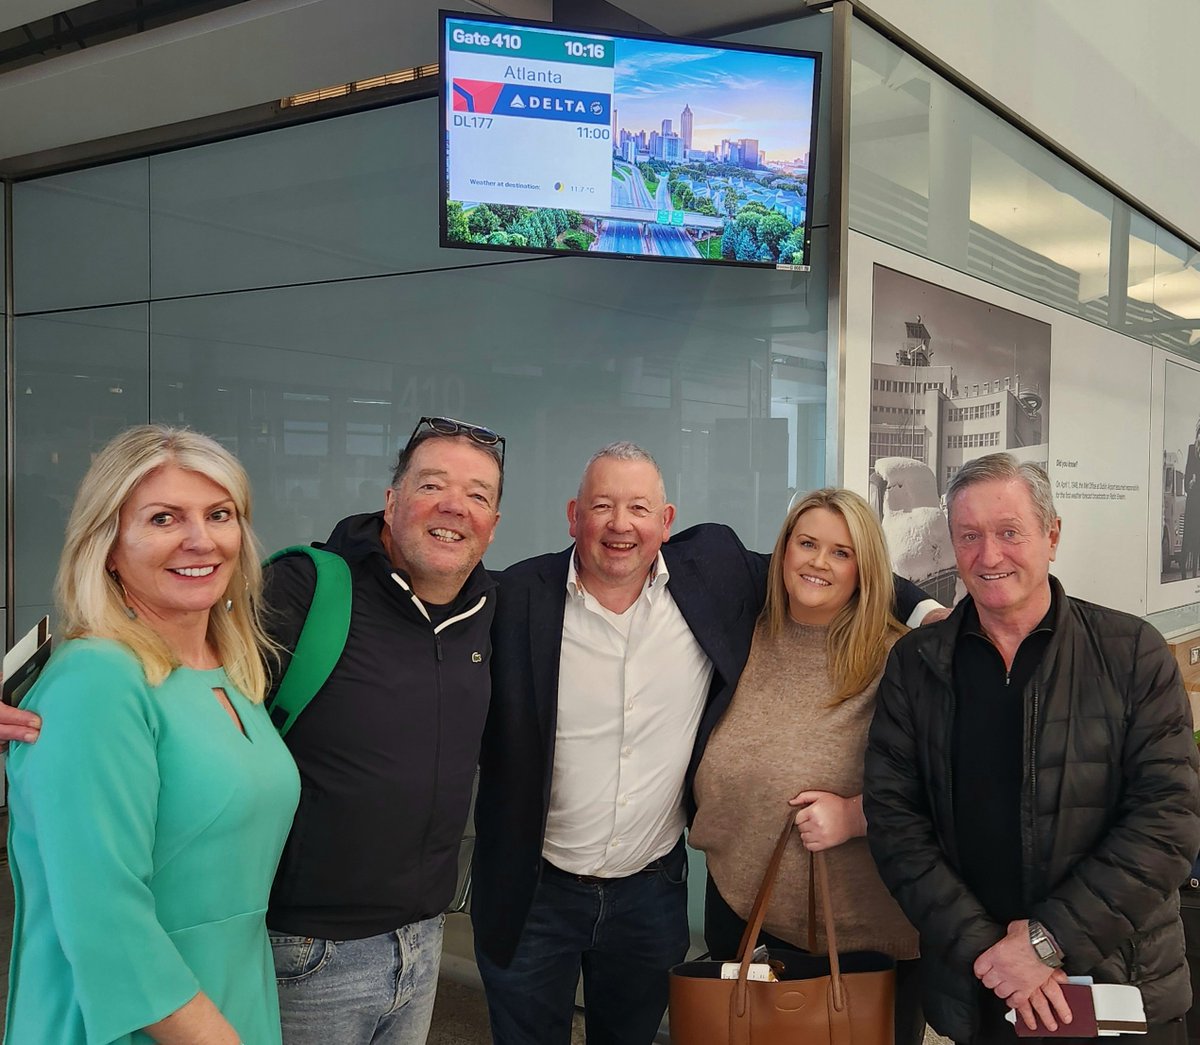 So, first gang off to @GatewayToEurope to Atlanta. With the legend @amcgennis1 from @SigmarIrl with team @TheHRCompanyIRE as well. @ThePanelDublin delighted to be involved again. Atlanta, here we come...